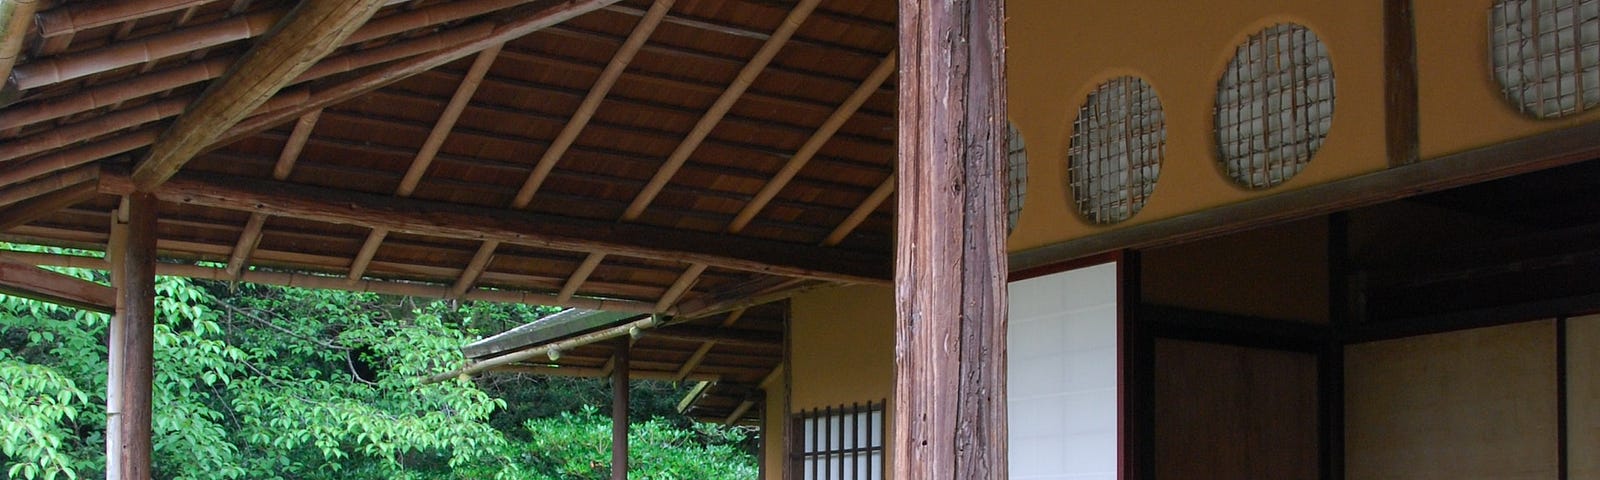 The wooden front porch of a traditional Japanese home.